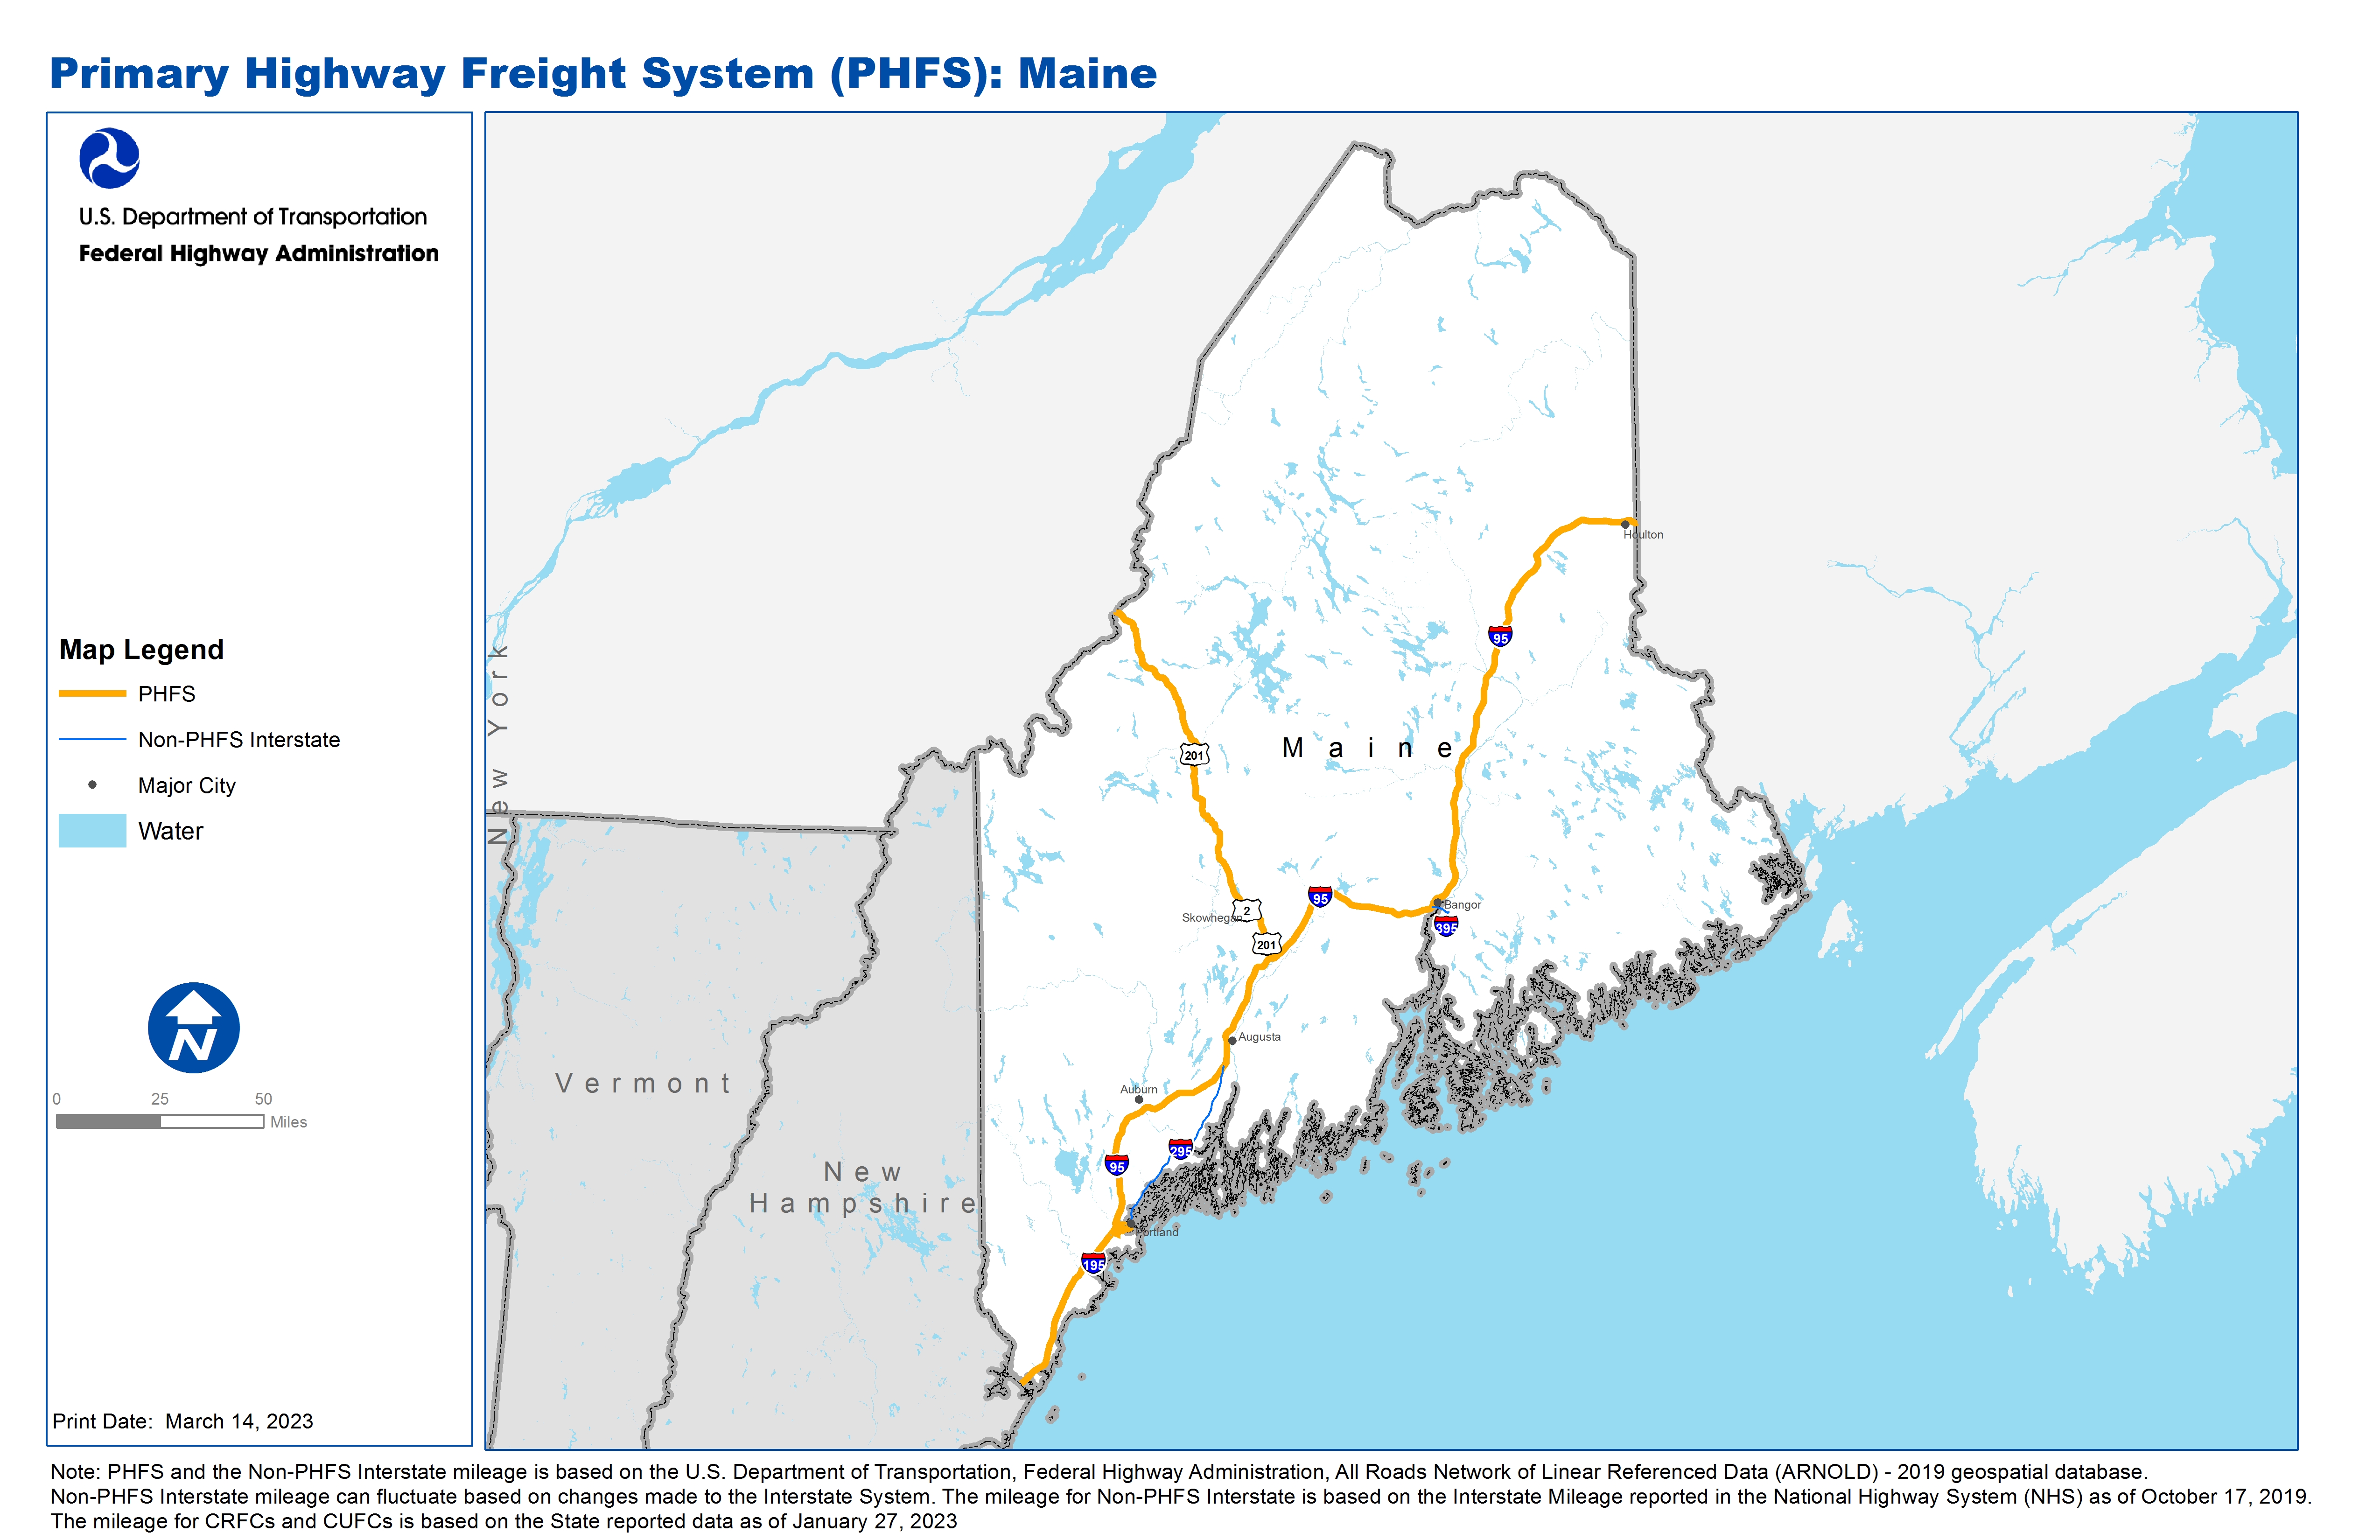 This map shows the Primary Highway Freight System (PHFS) routes as well as all the Interstate Highways within the state that are not part of the PHFS, as designated on 12/22/2022.